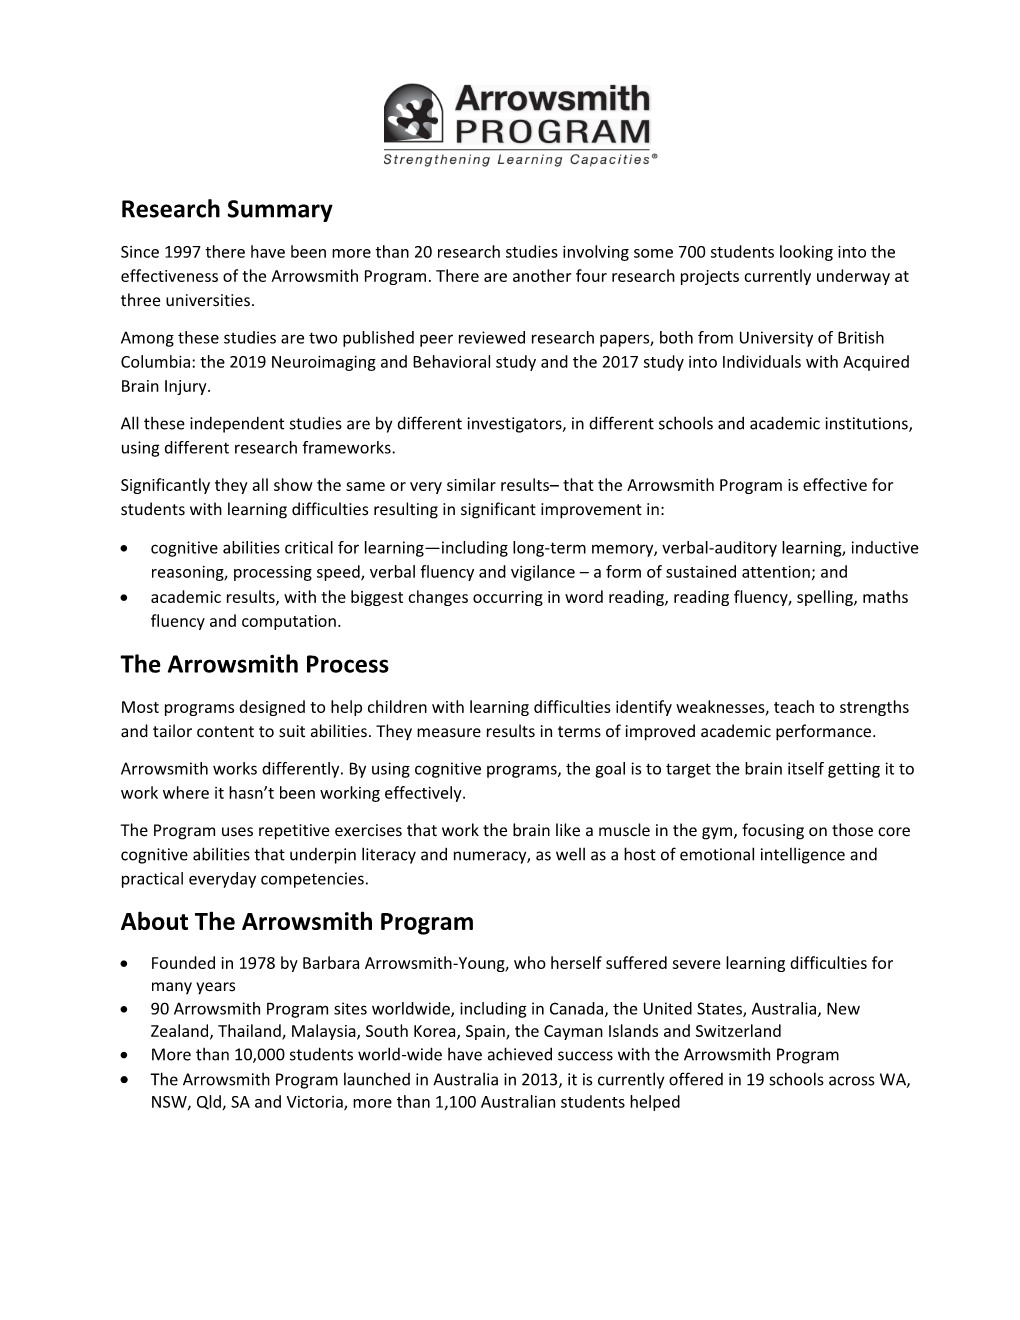 Research Summary the Arrowsmith Process About